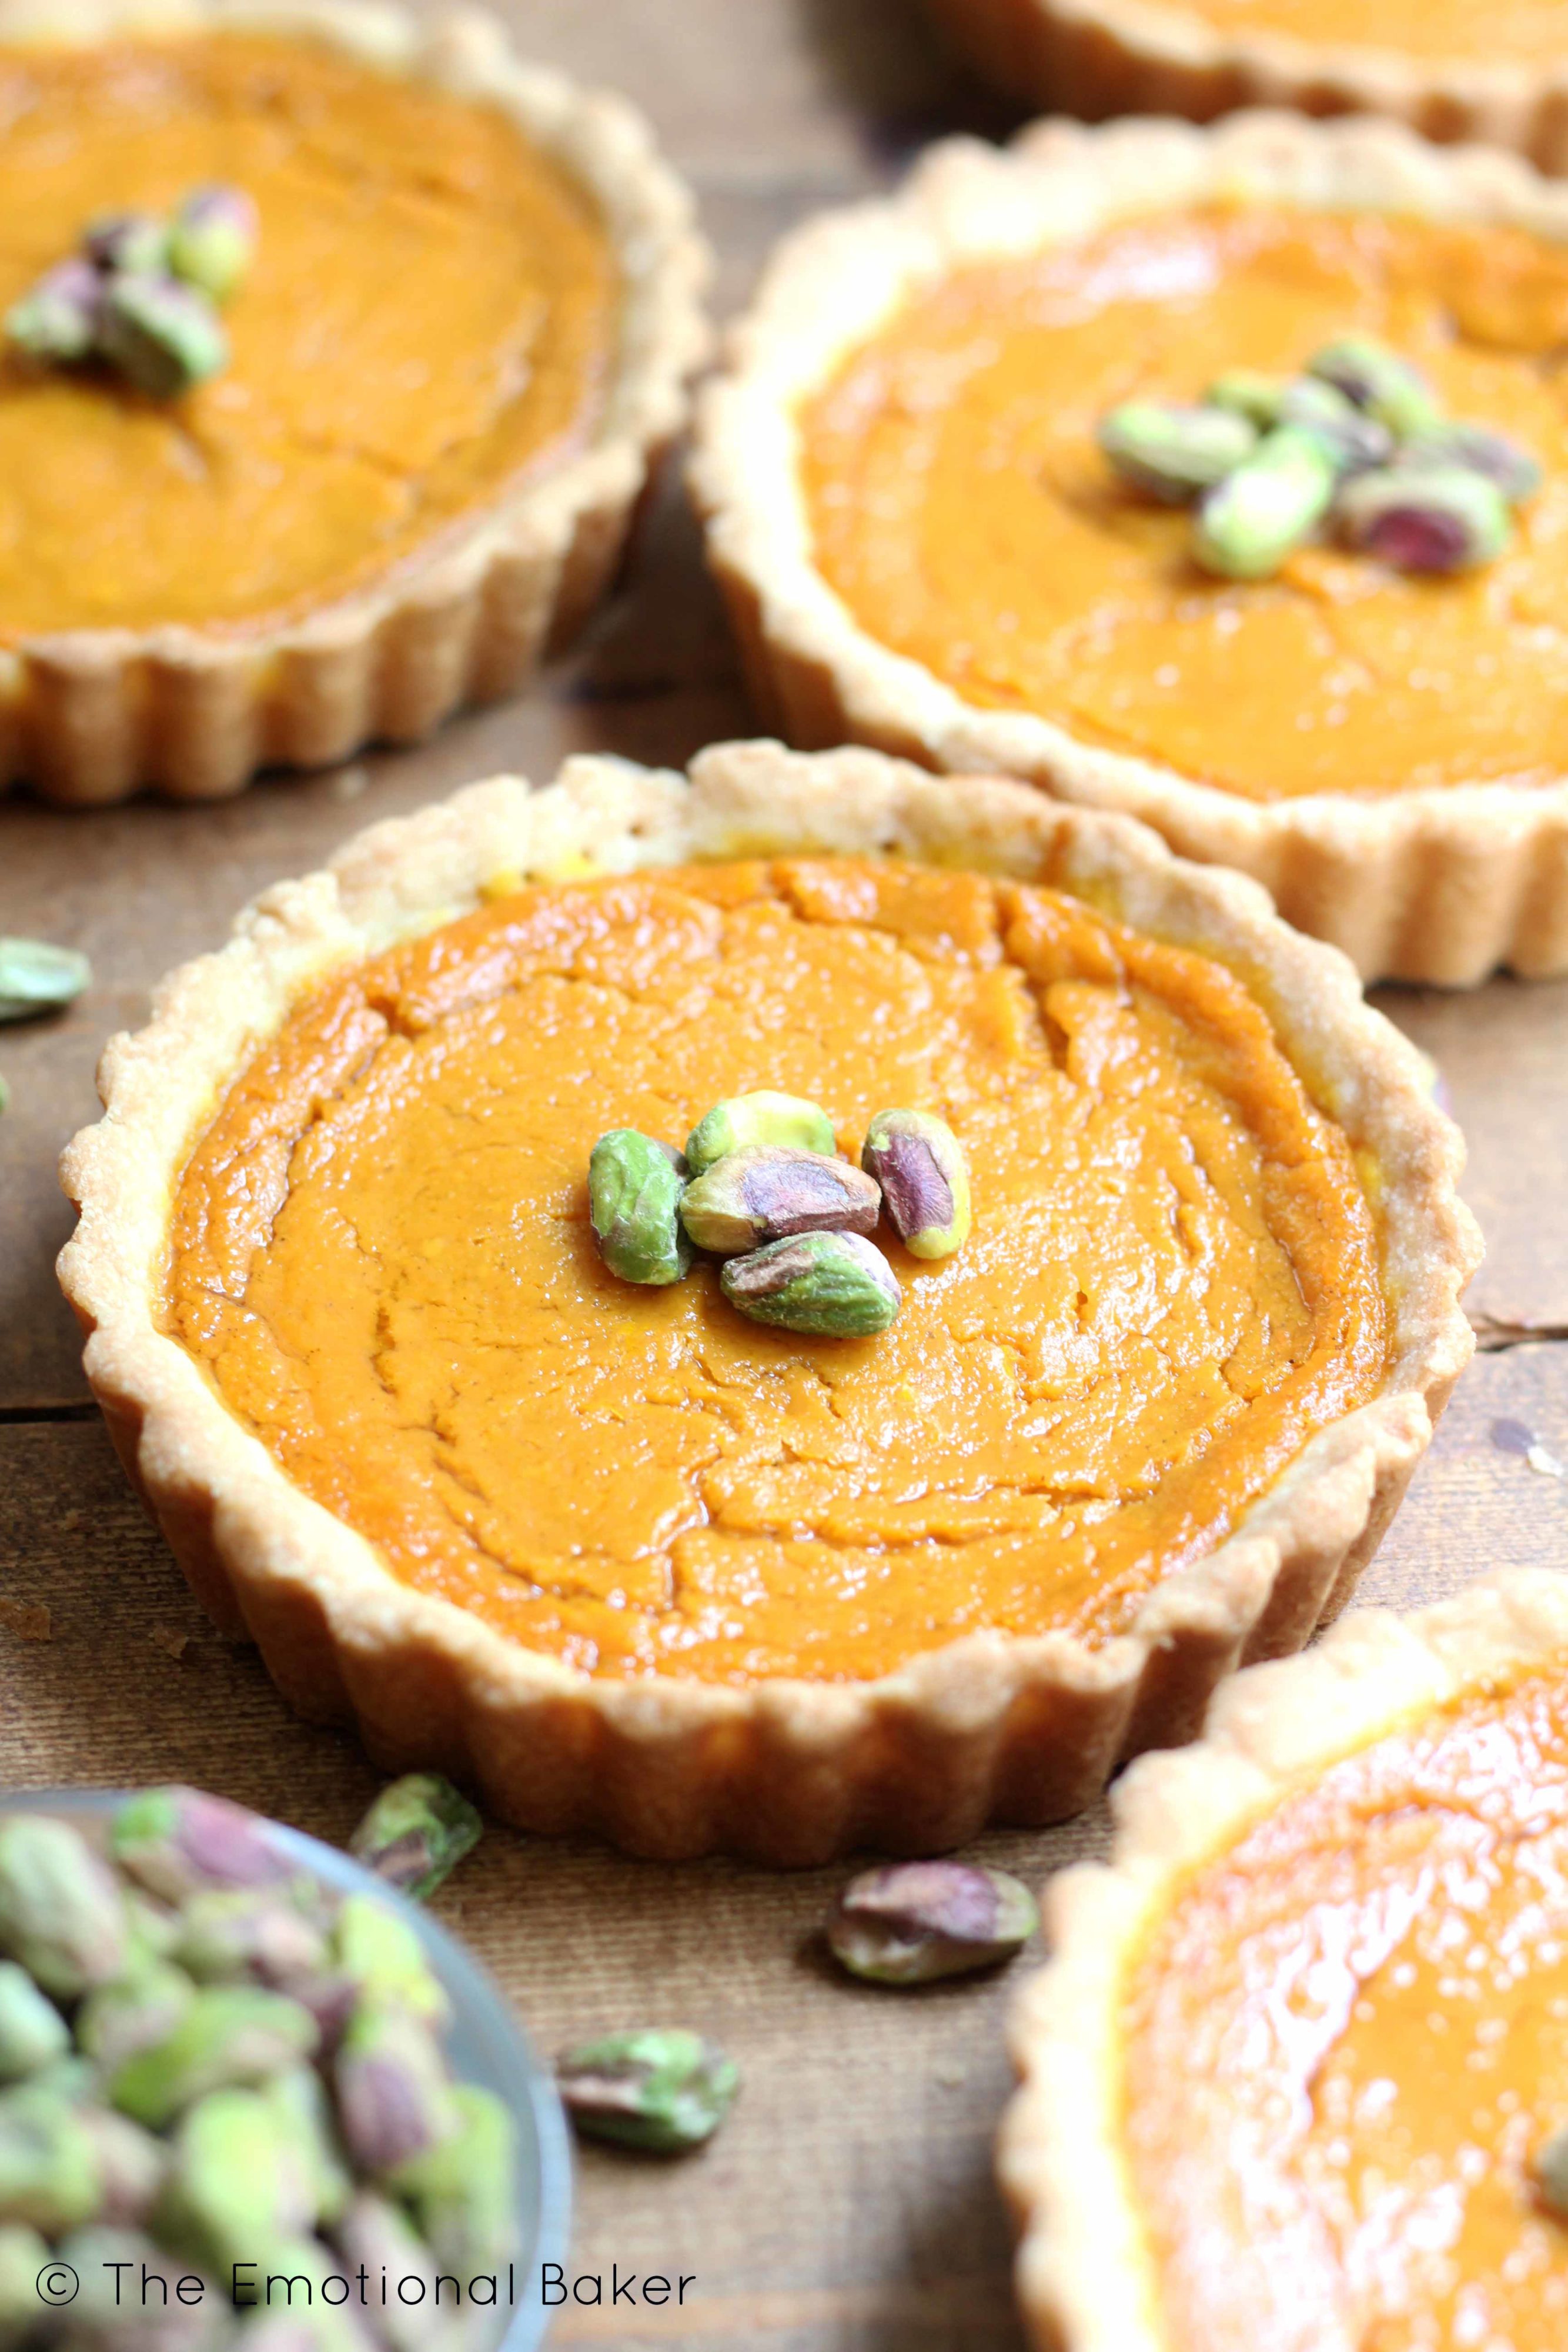 Add a new dessert to your Easter celebration - Carrot Tarts. These sweet mini pies are bursting with carrot flavor and accented with cardamom and nutmeg.